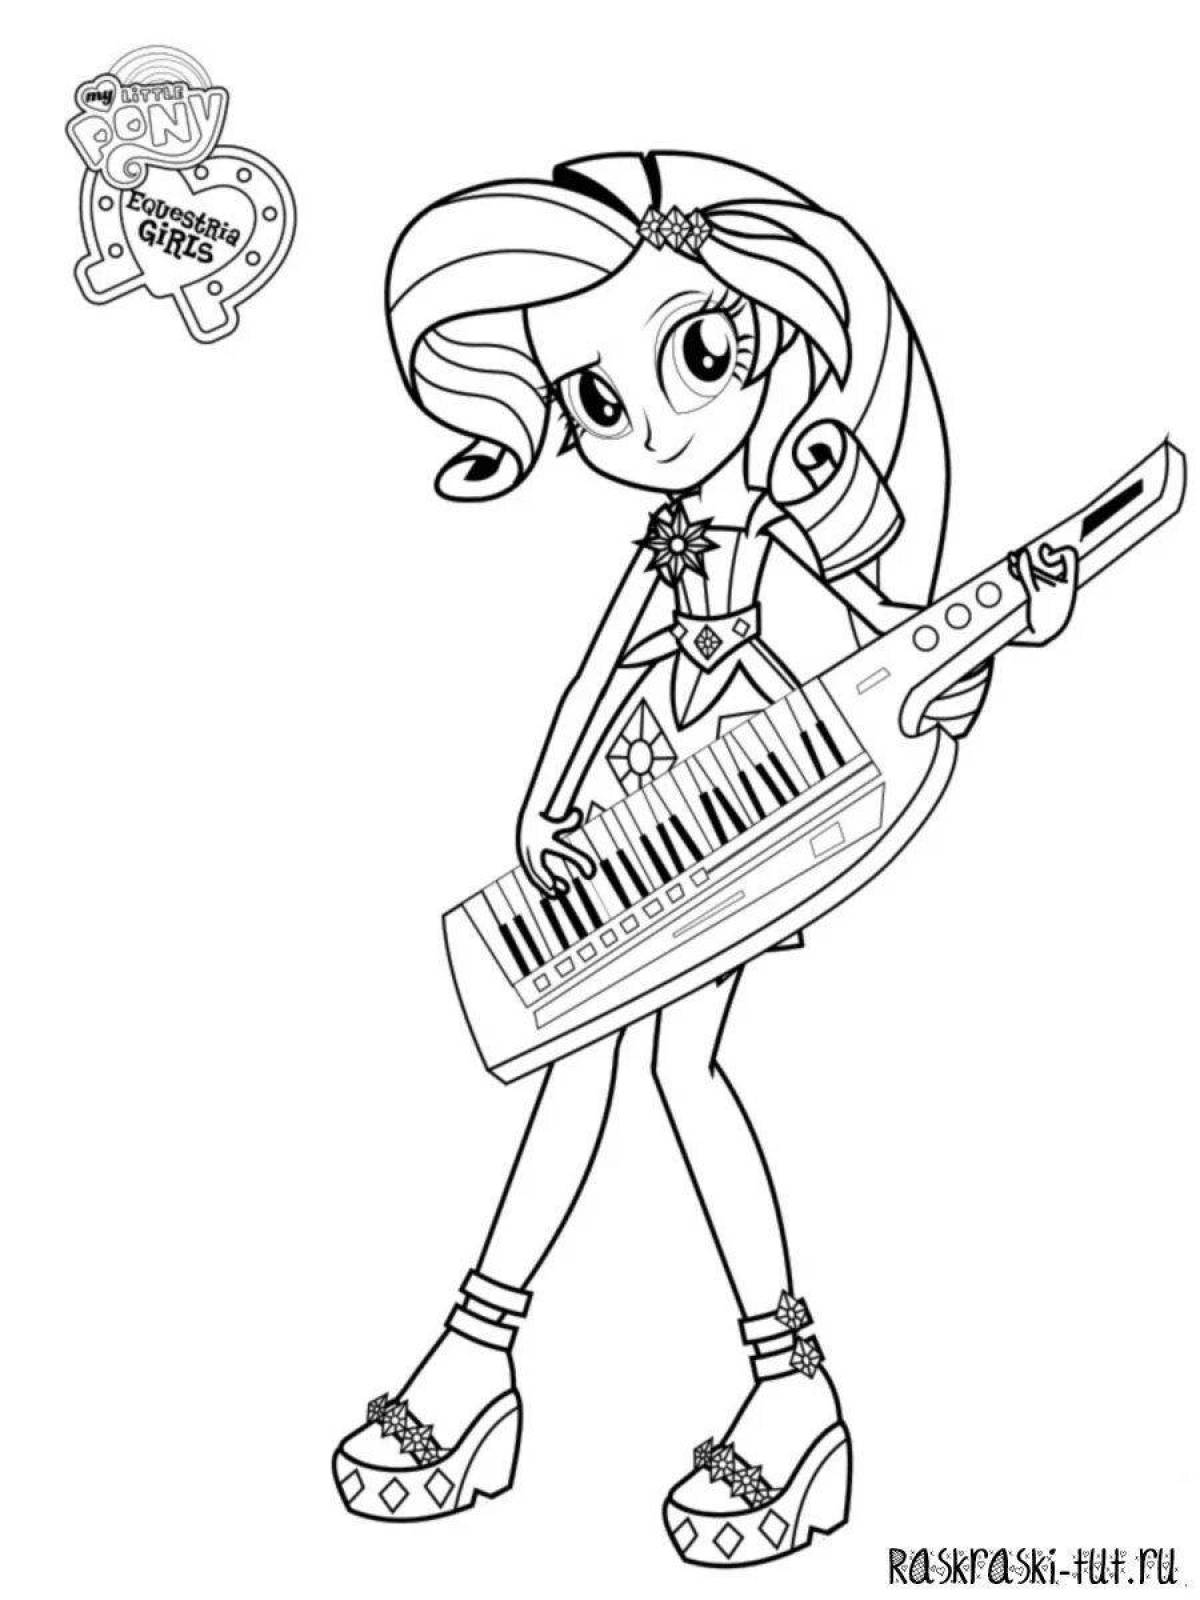 Colorful equestria pony coloring page